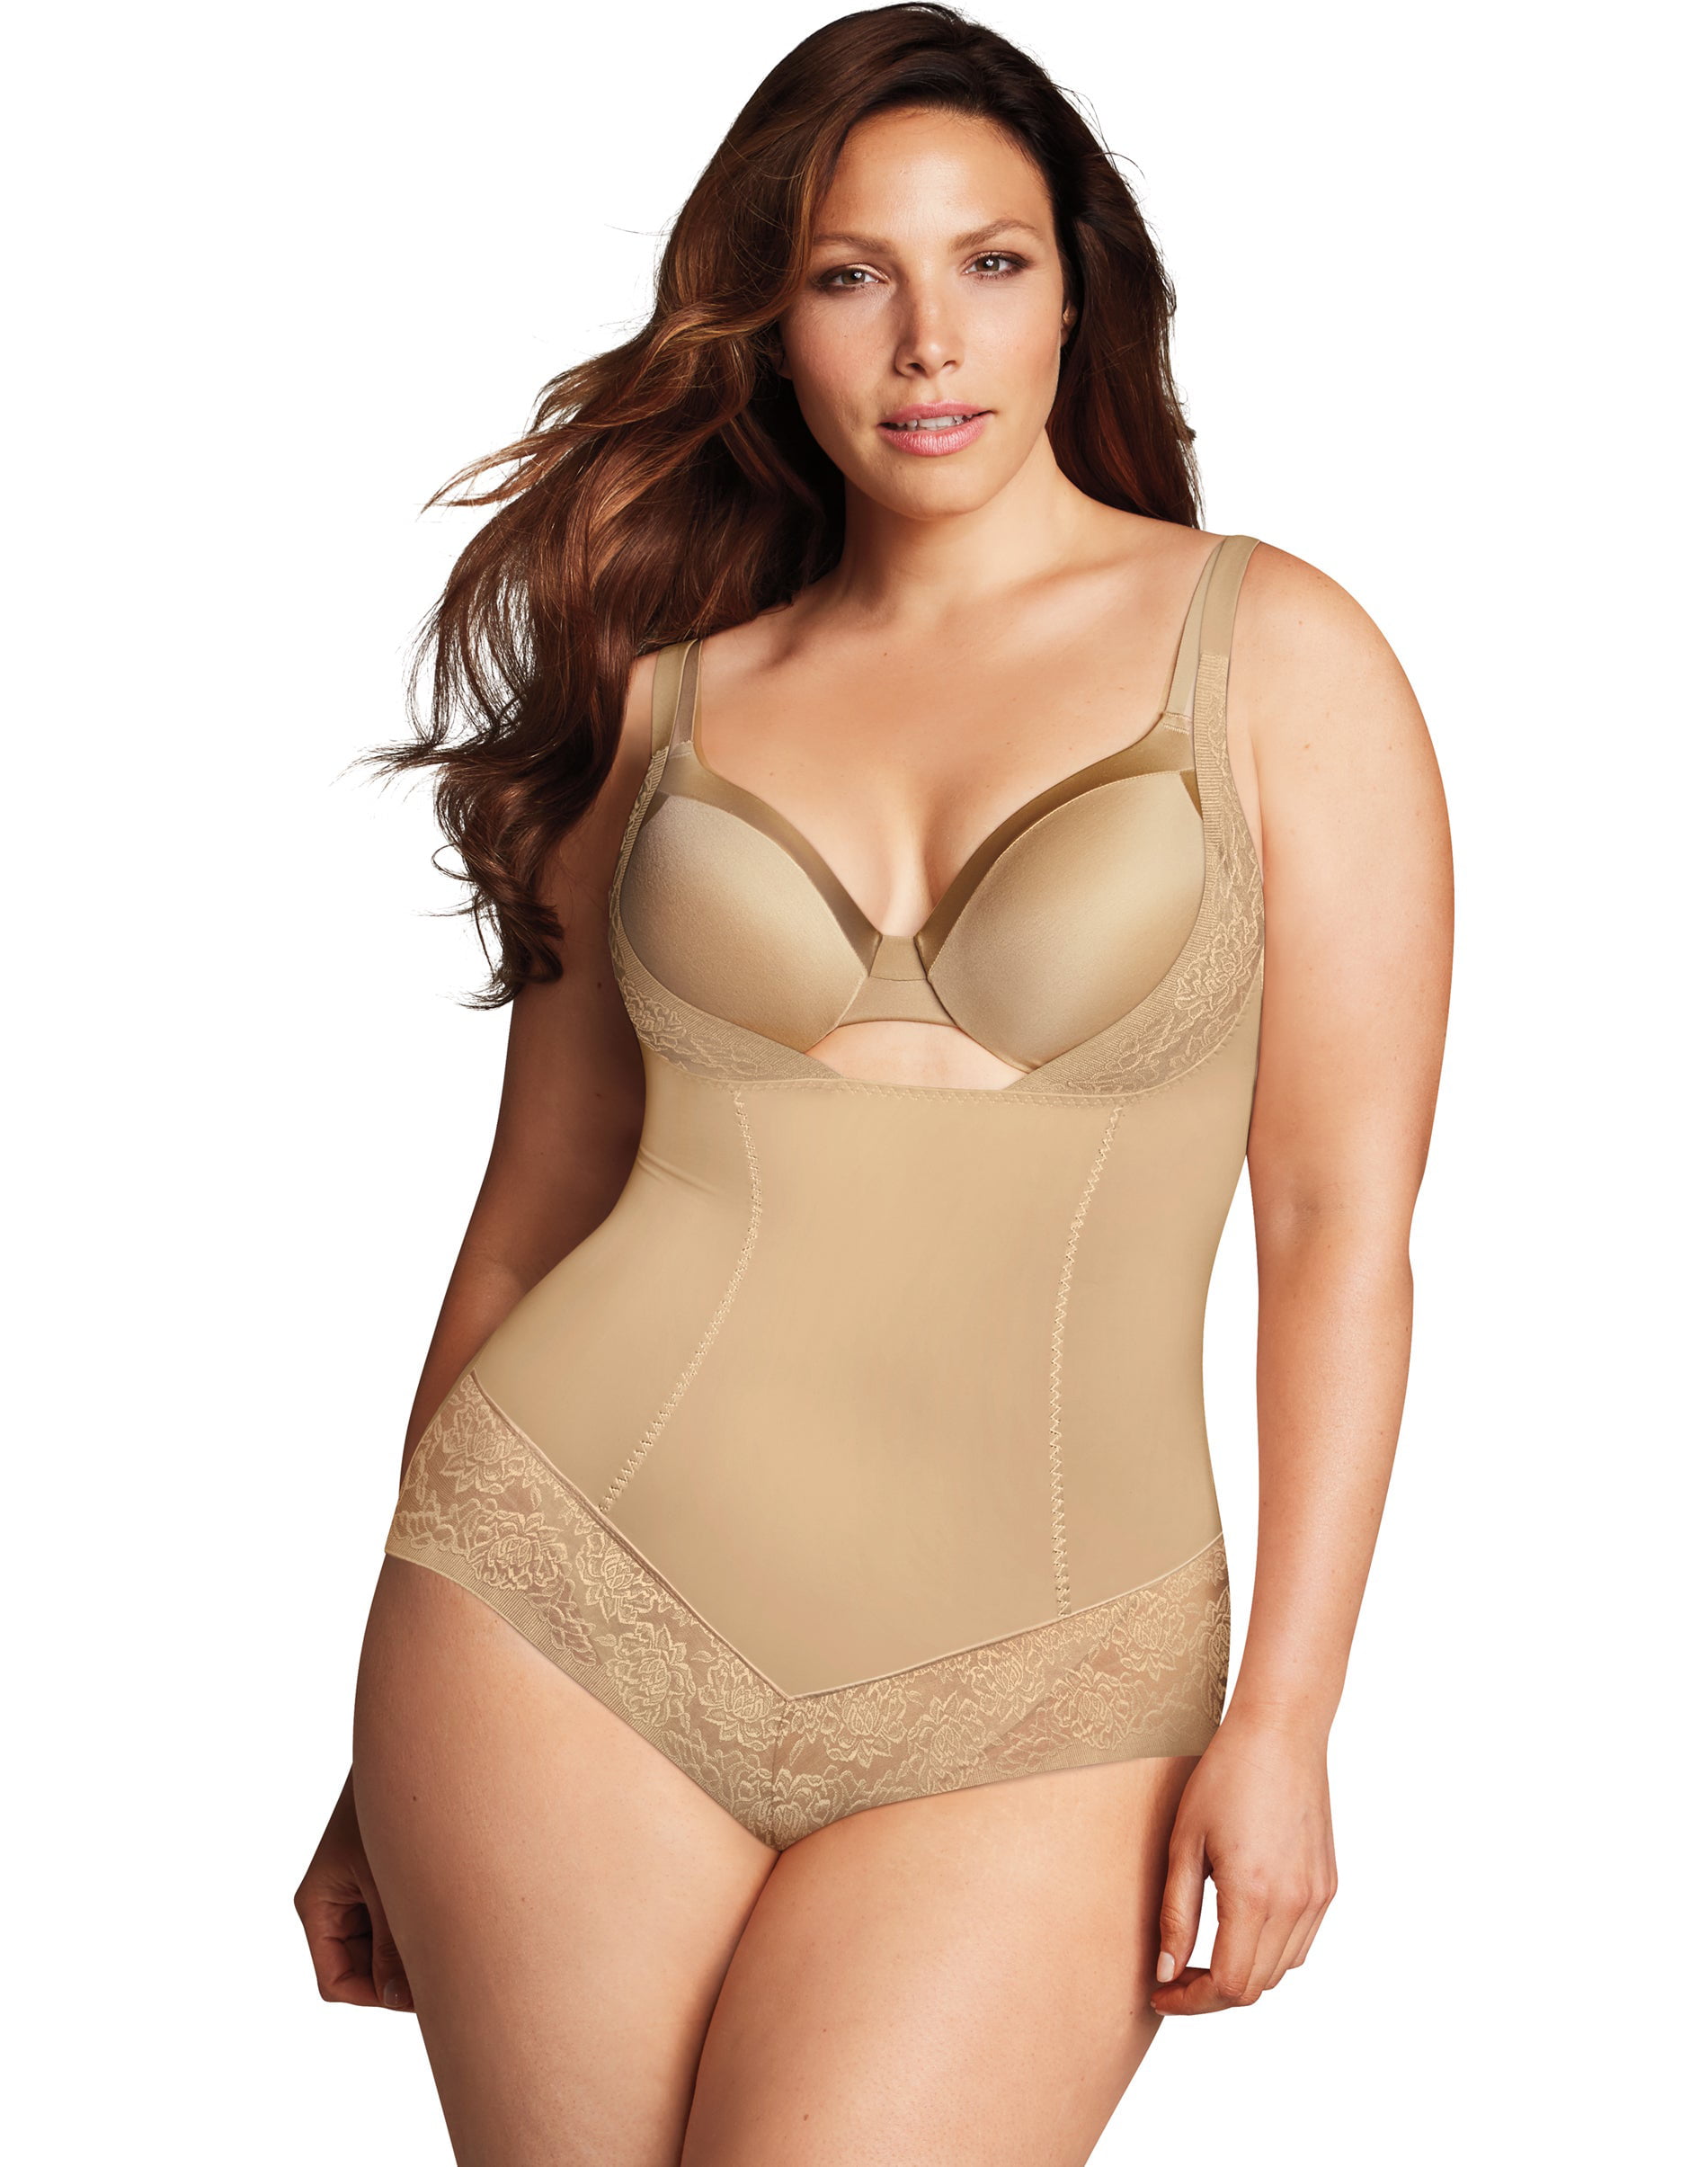 Flexee Womens Curvy Firm Foundations Wear Your Own Bra Torsette Base Layer Top